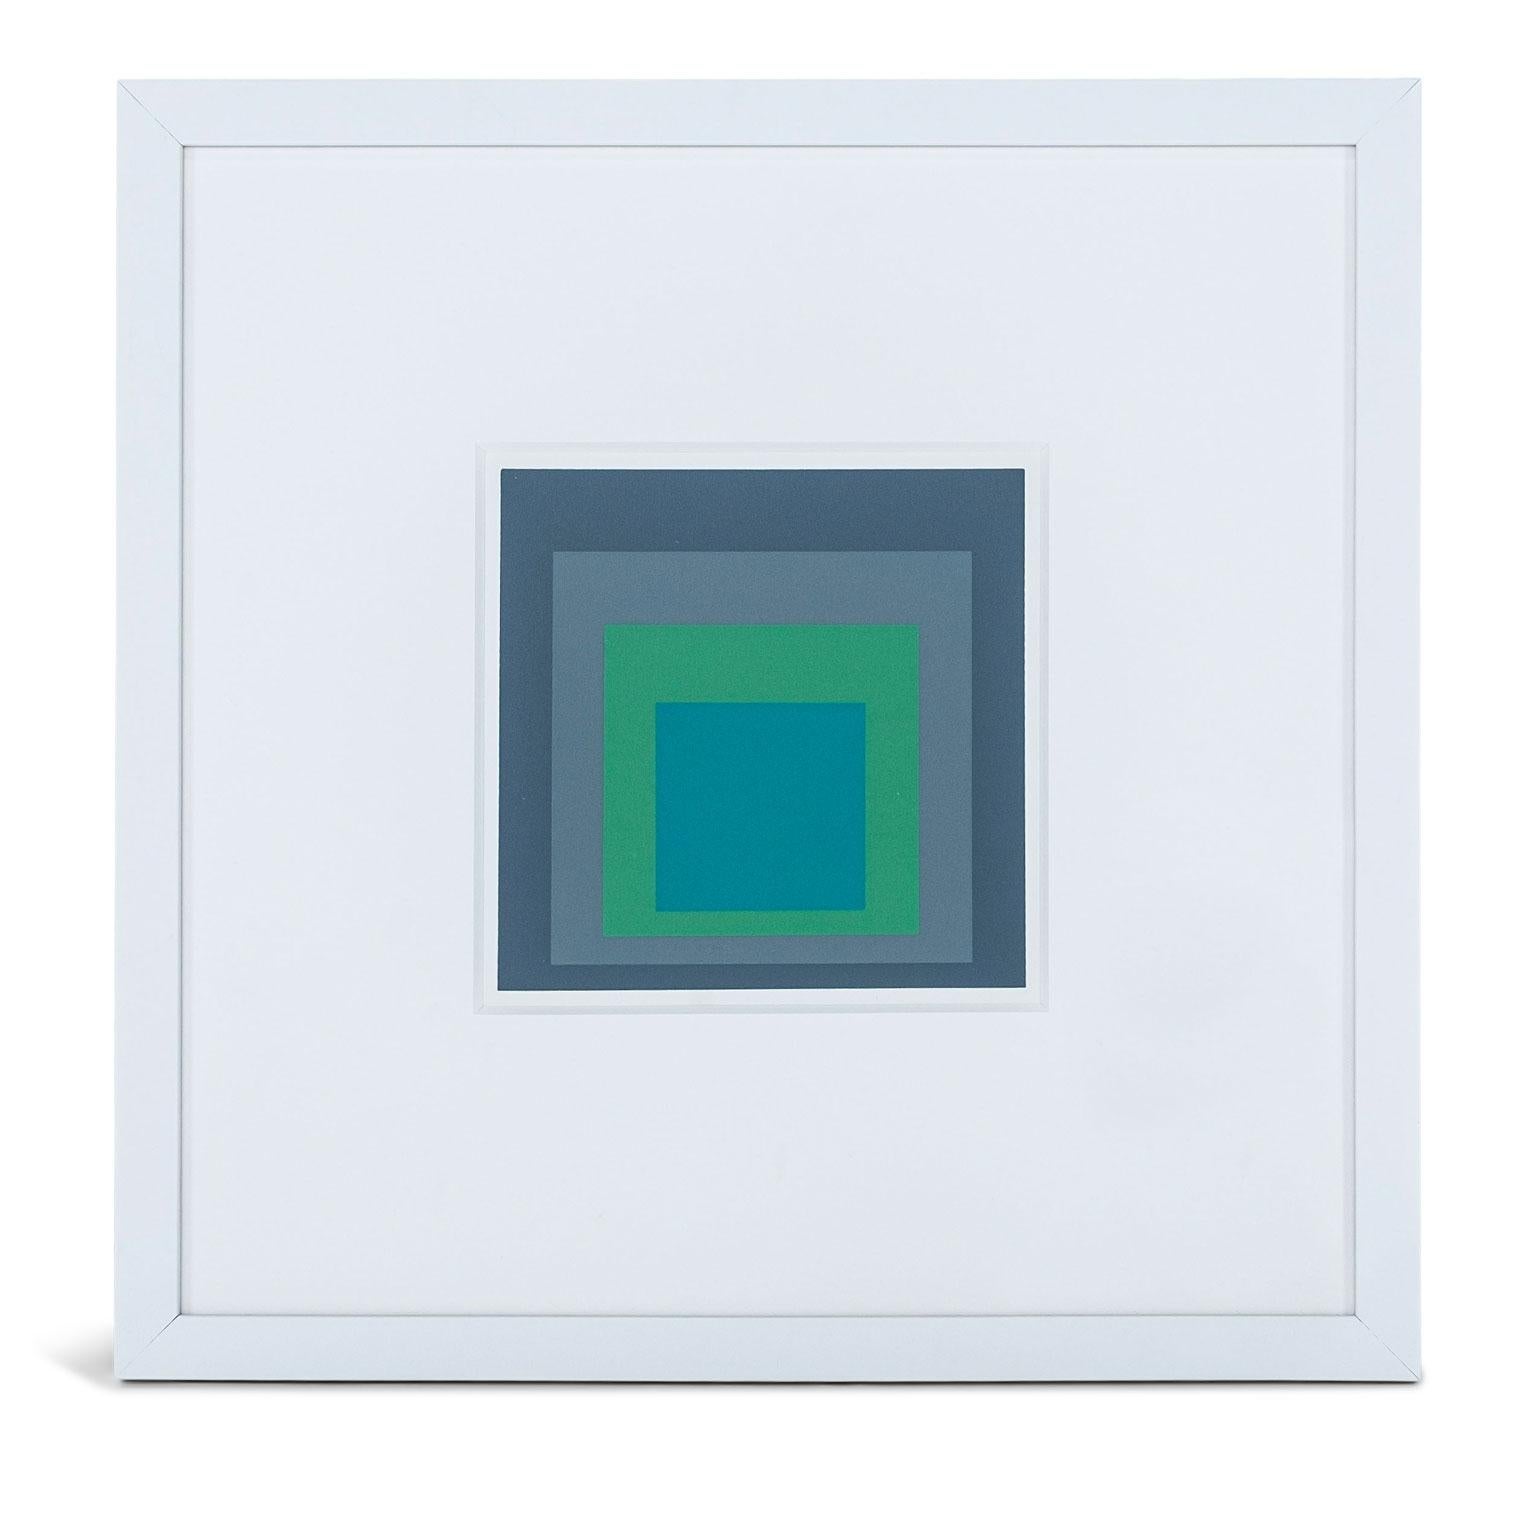 Homage to the Square serigraphs by Josef Albers: original mid-century silk screen prints by Josef Albers (1888-1976), published in a portfolio by Verlag Aurel Bongers KG, Recklinghausen, Germany in 1977. Mat window is 8.63 inches by 8.63 inches.